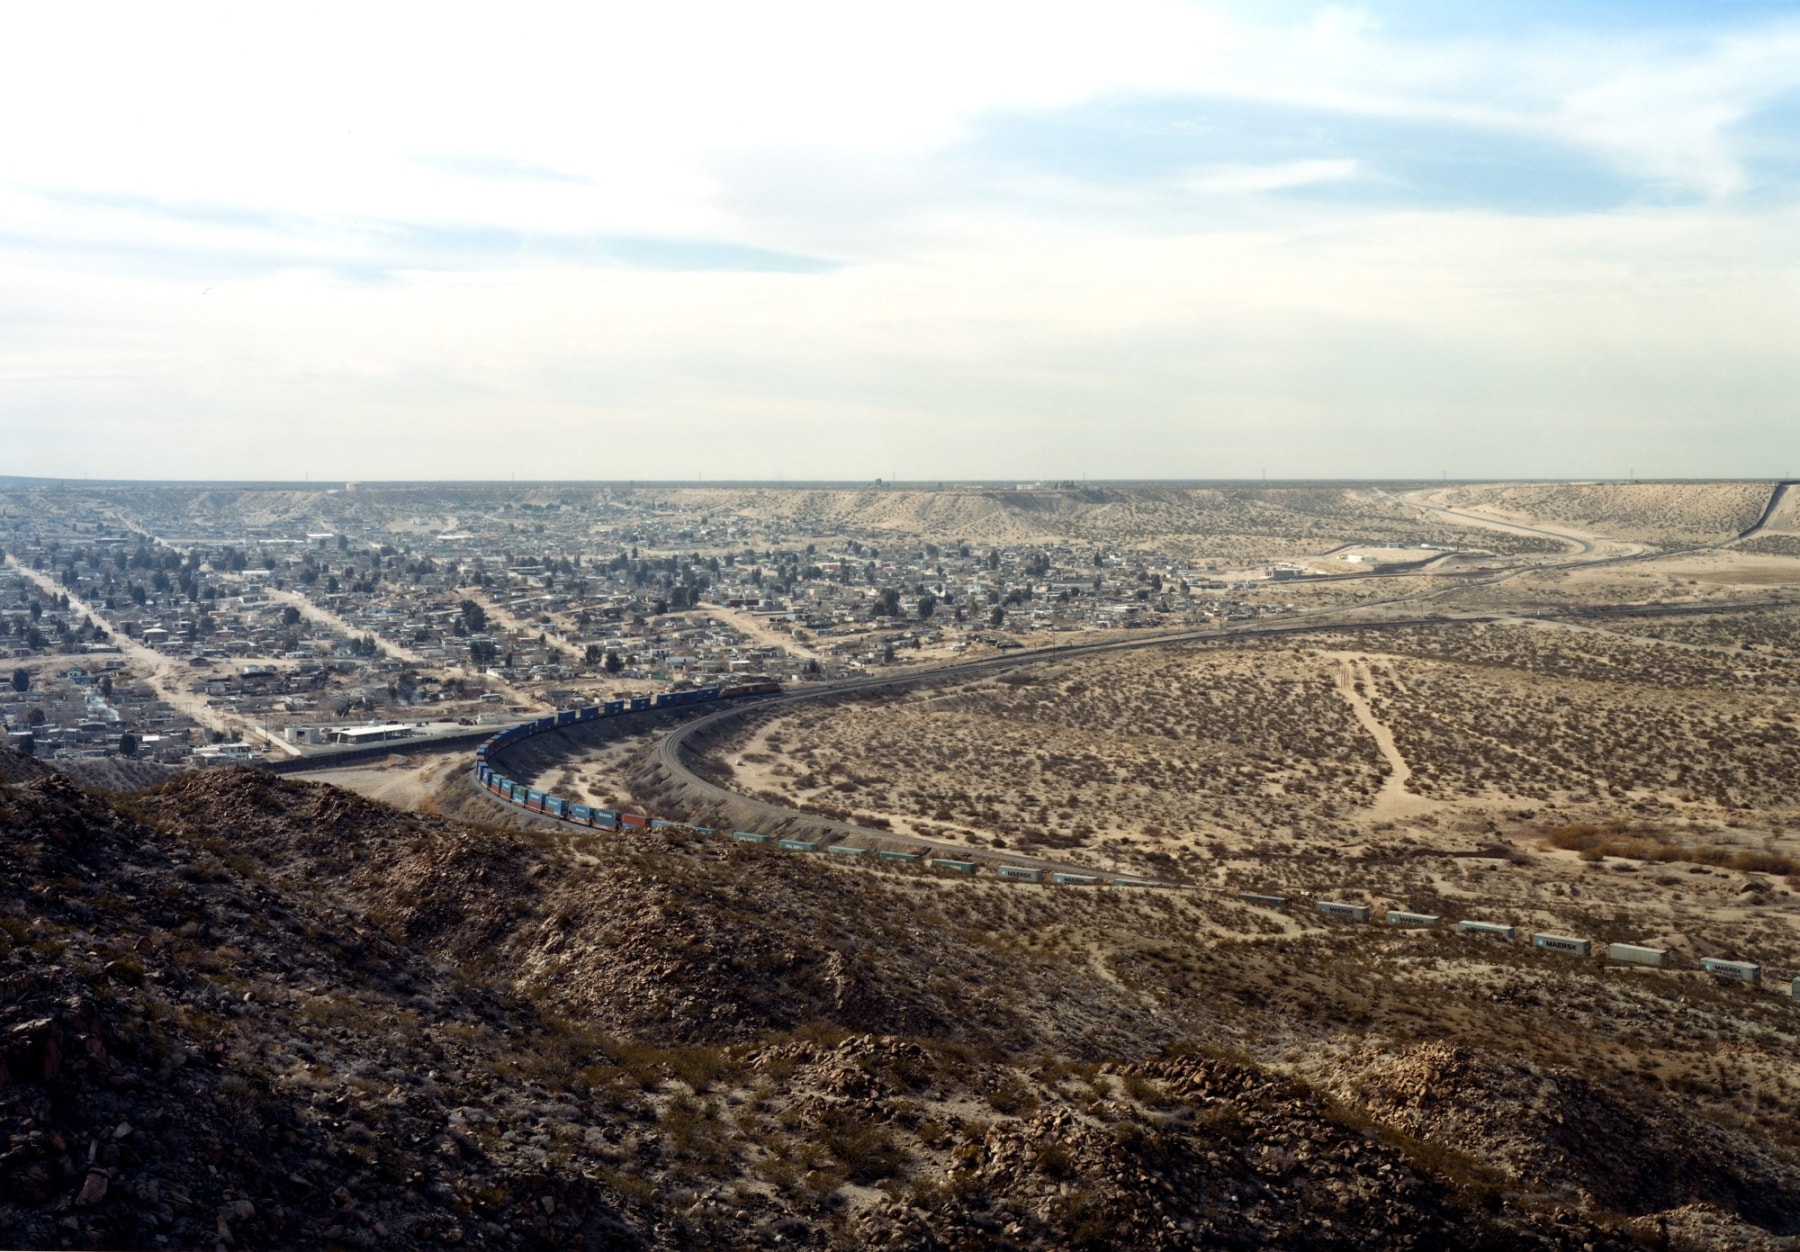 Untitled (Train from Cristo Rey), Sunland Park, New Mexico, 2010, 39 x 55 or 55 x 77 inch chromogenic print